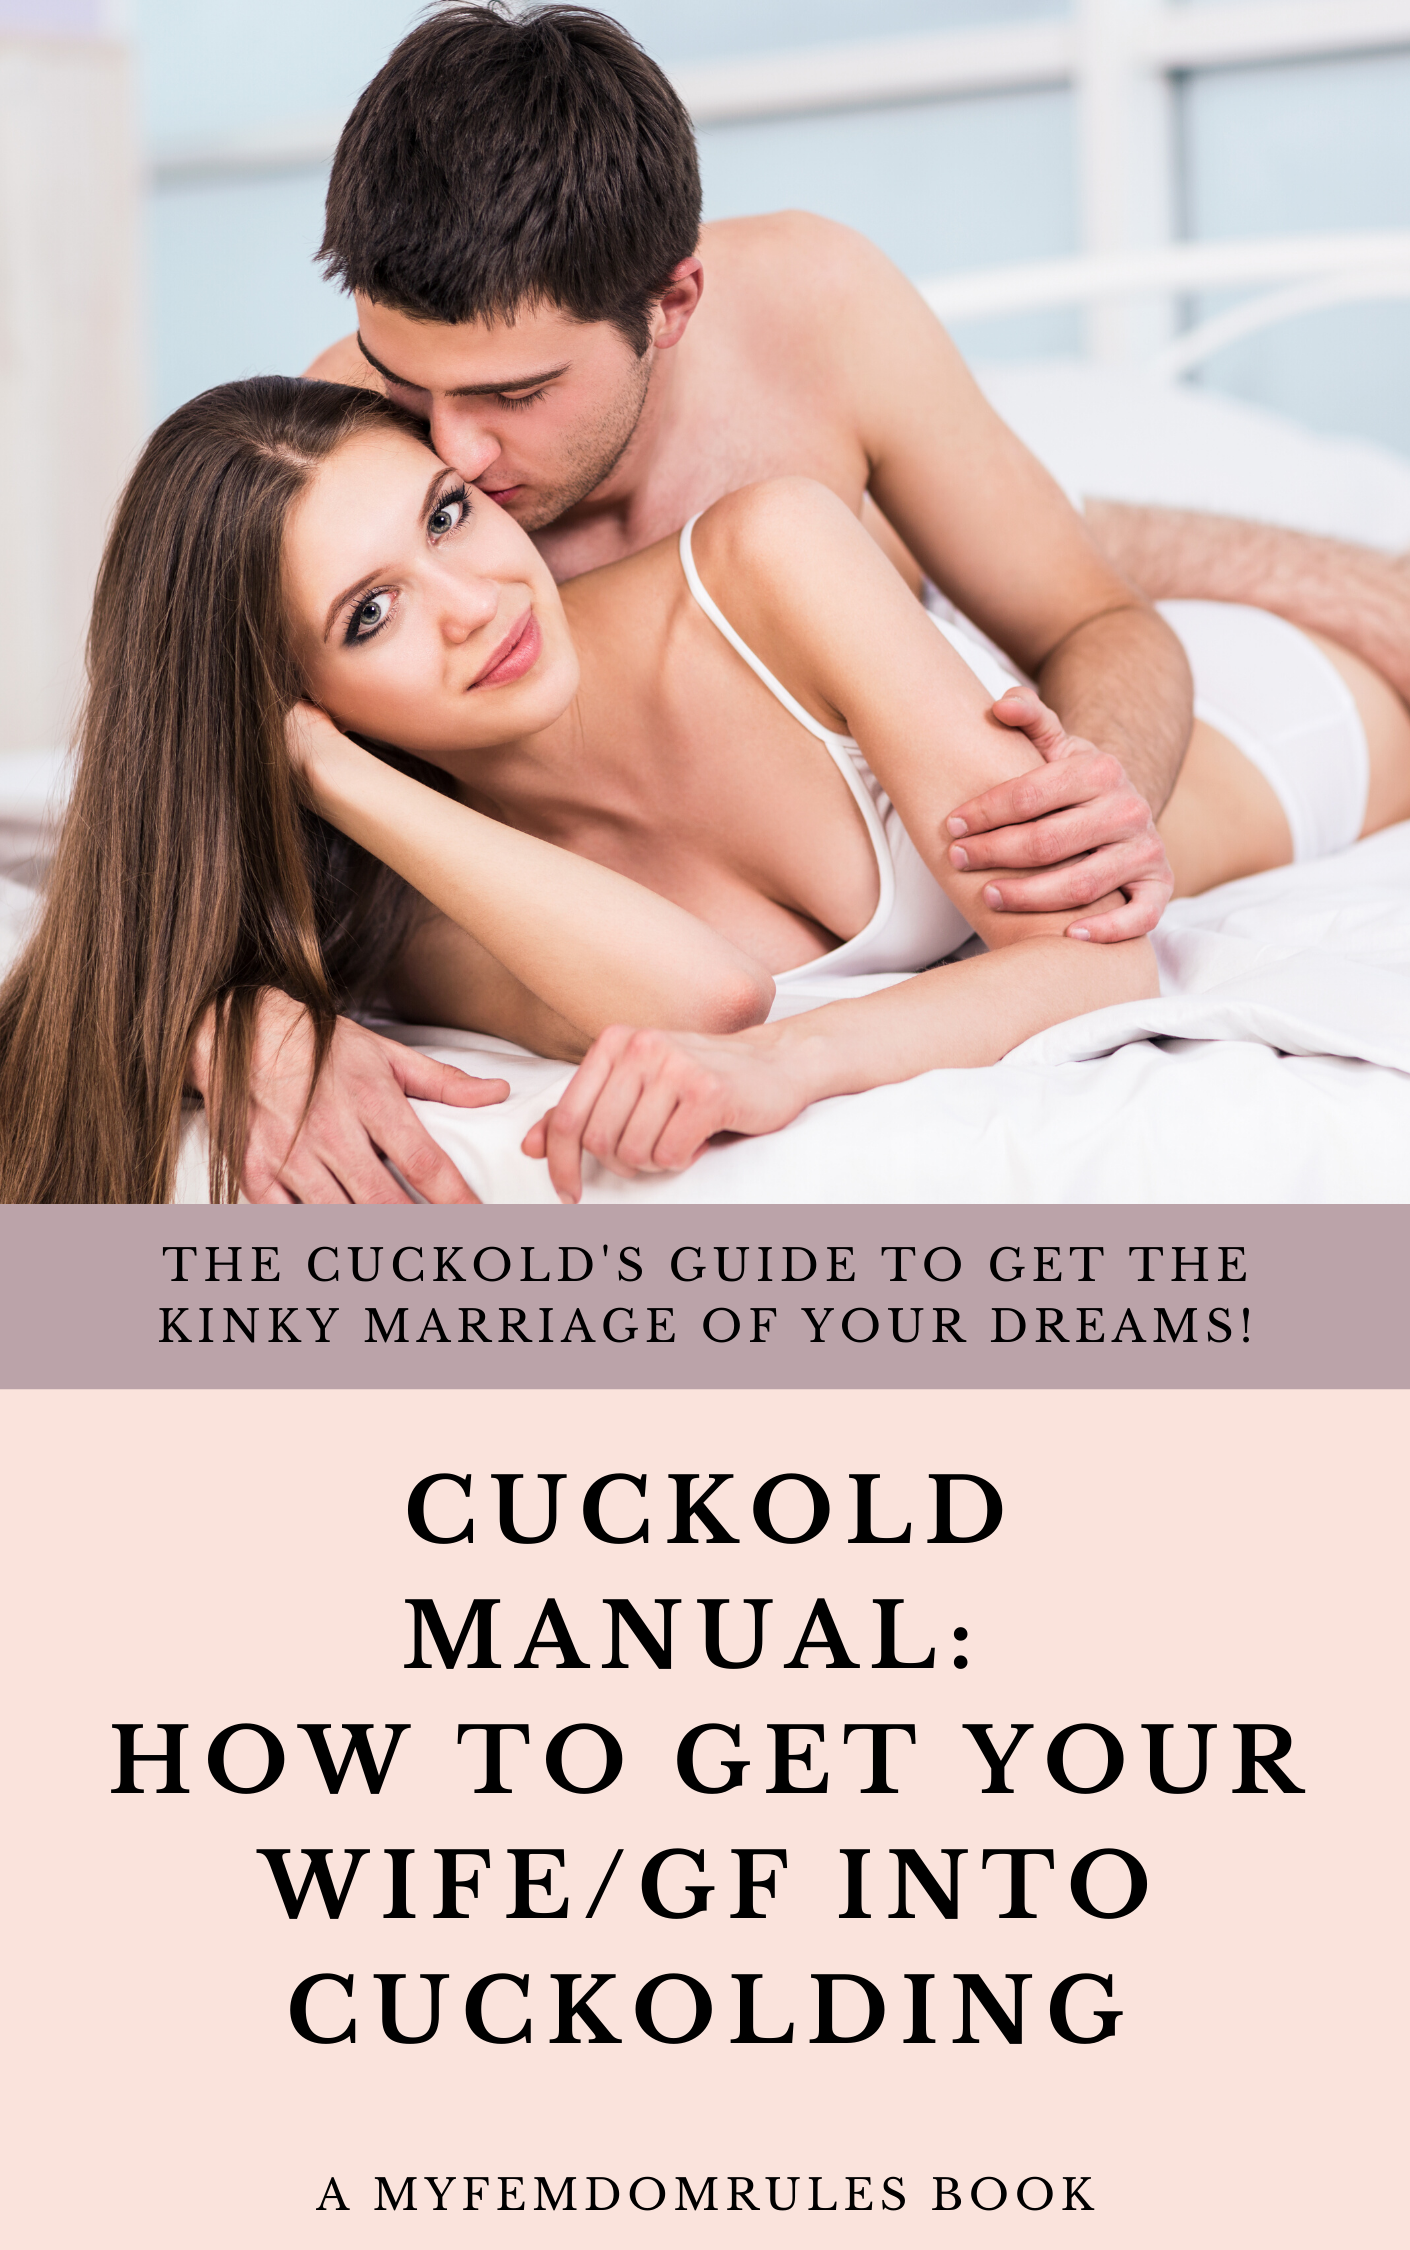 Cuckold Manual How To Get Your Wife/Girlfriend Into Cuckolding (eBook)